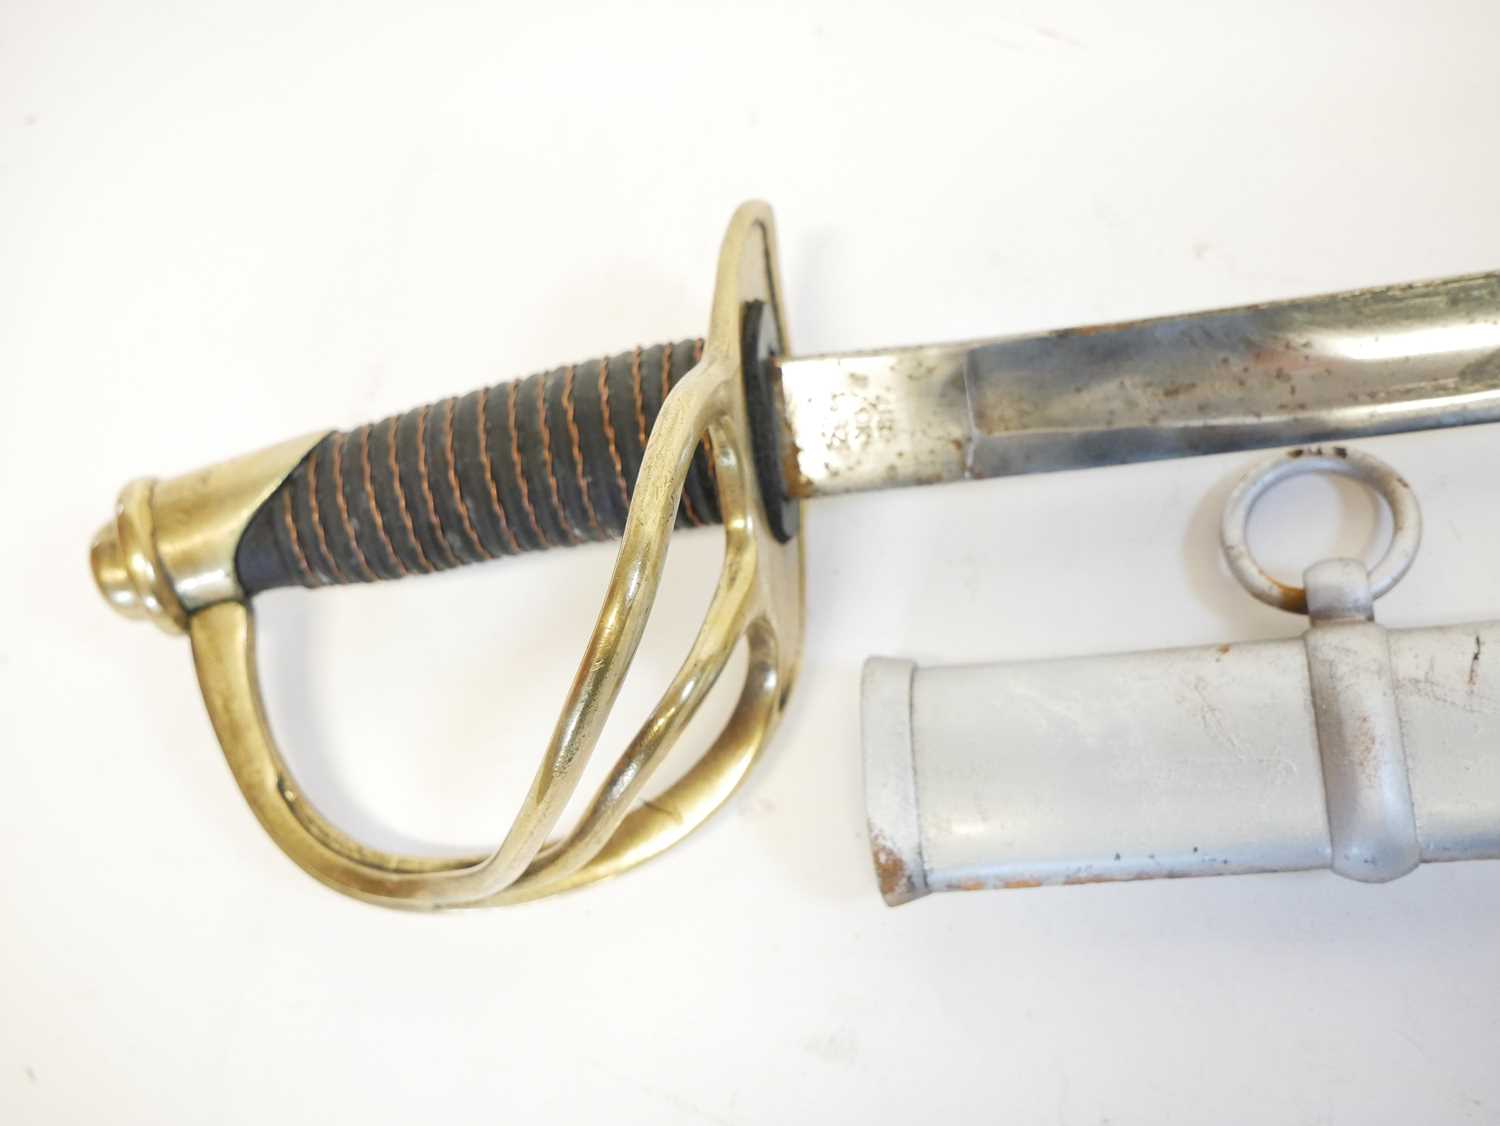 Reproduction US wrist breaker cavalry sabre and scabbard, curved fullered blade with brass guard and - Image 3 of 11